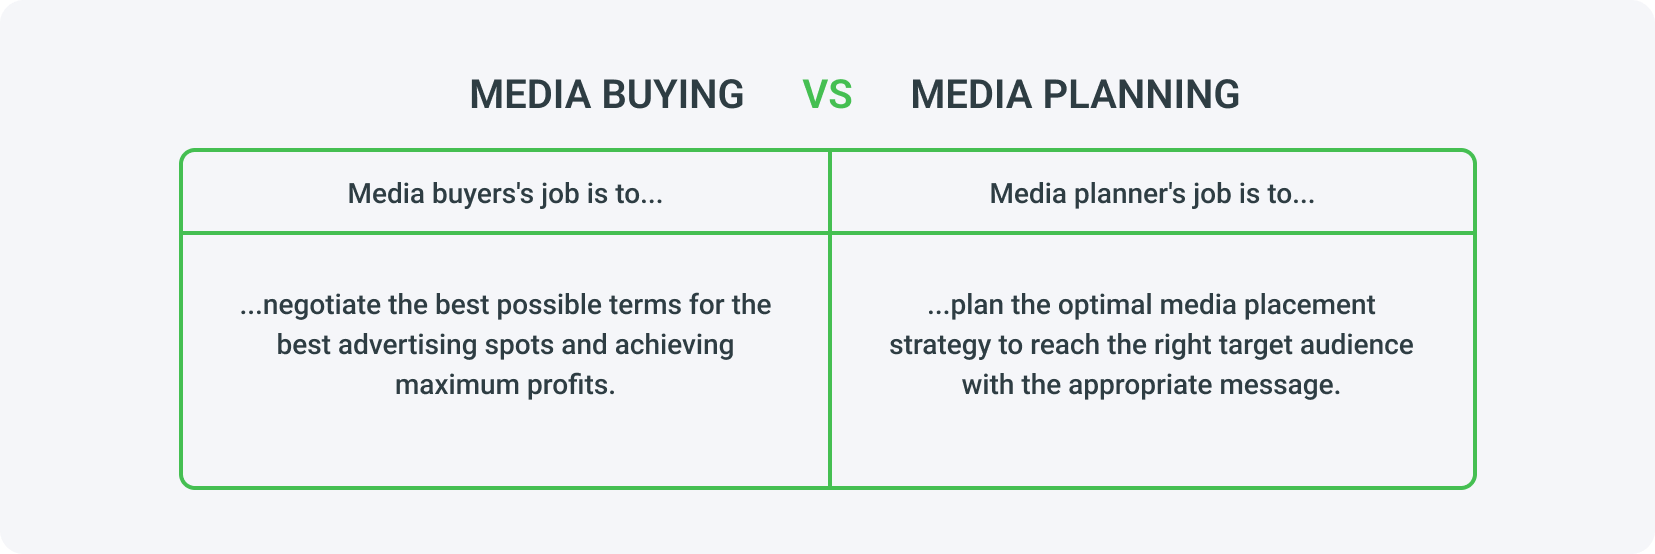 What is a difference between media planning and media buying? Media buying vs. media planning